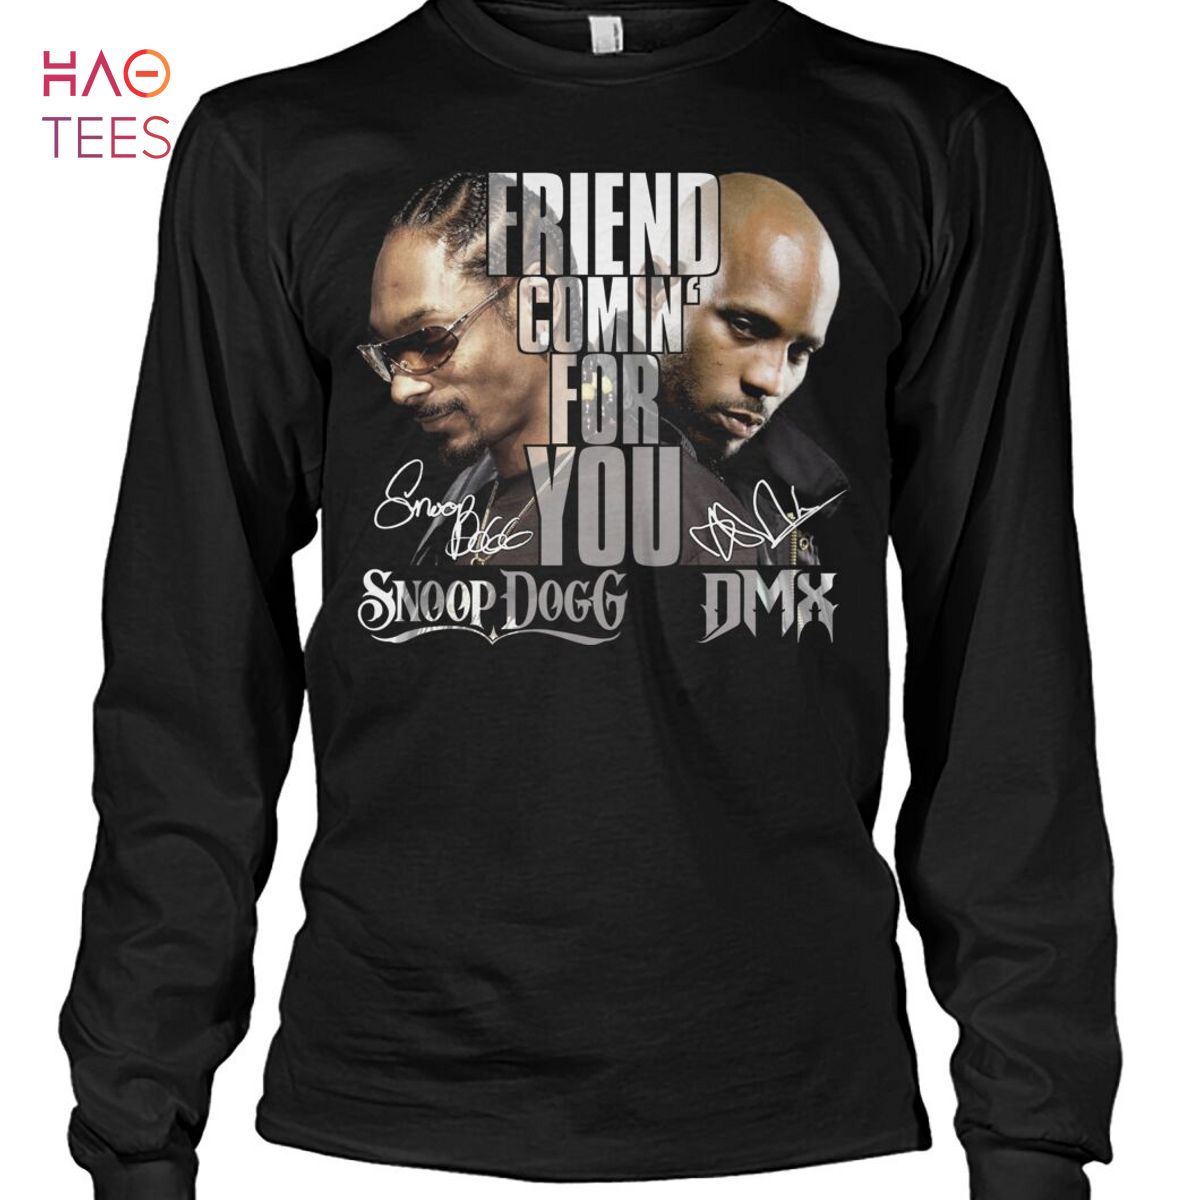 Snoop Dogg DMX Friend Comin For You T-Shirt